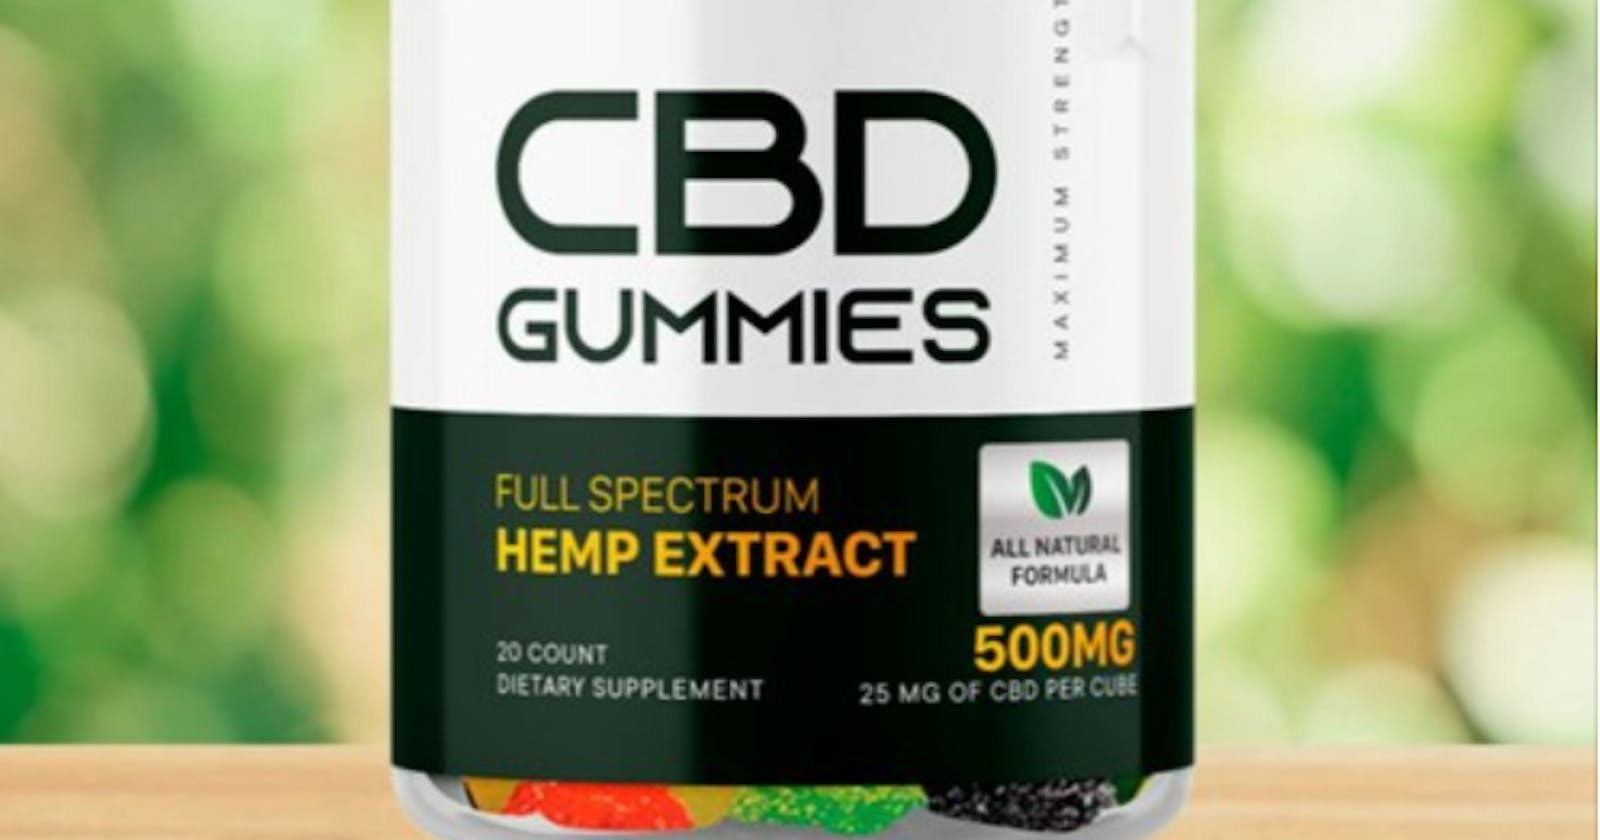 Organicore CBD Gummies (#PainRelief) Quickly Absorbed Into The Bloodstream To Reduces Pain Anxiety!